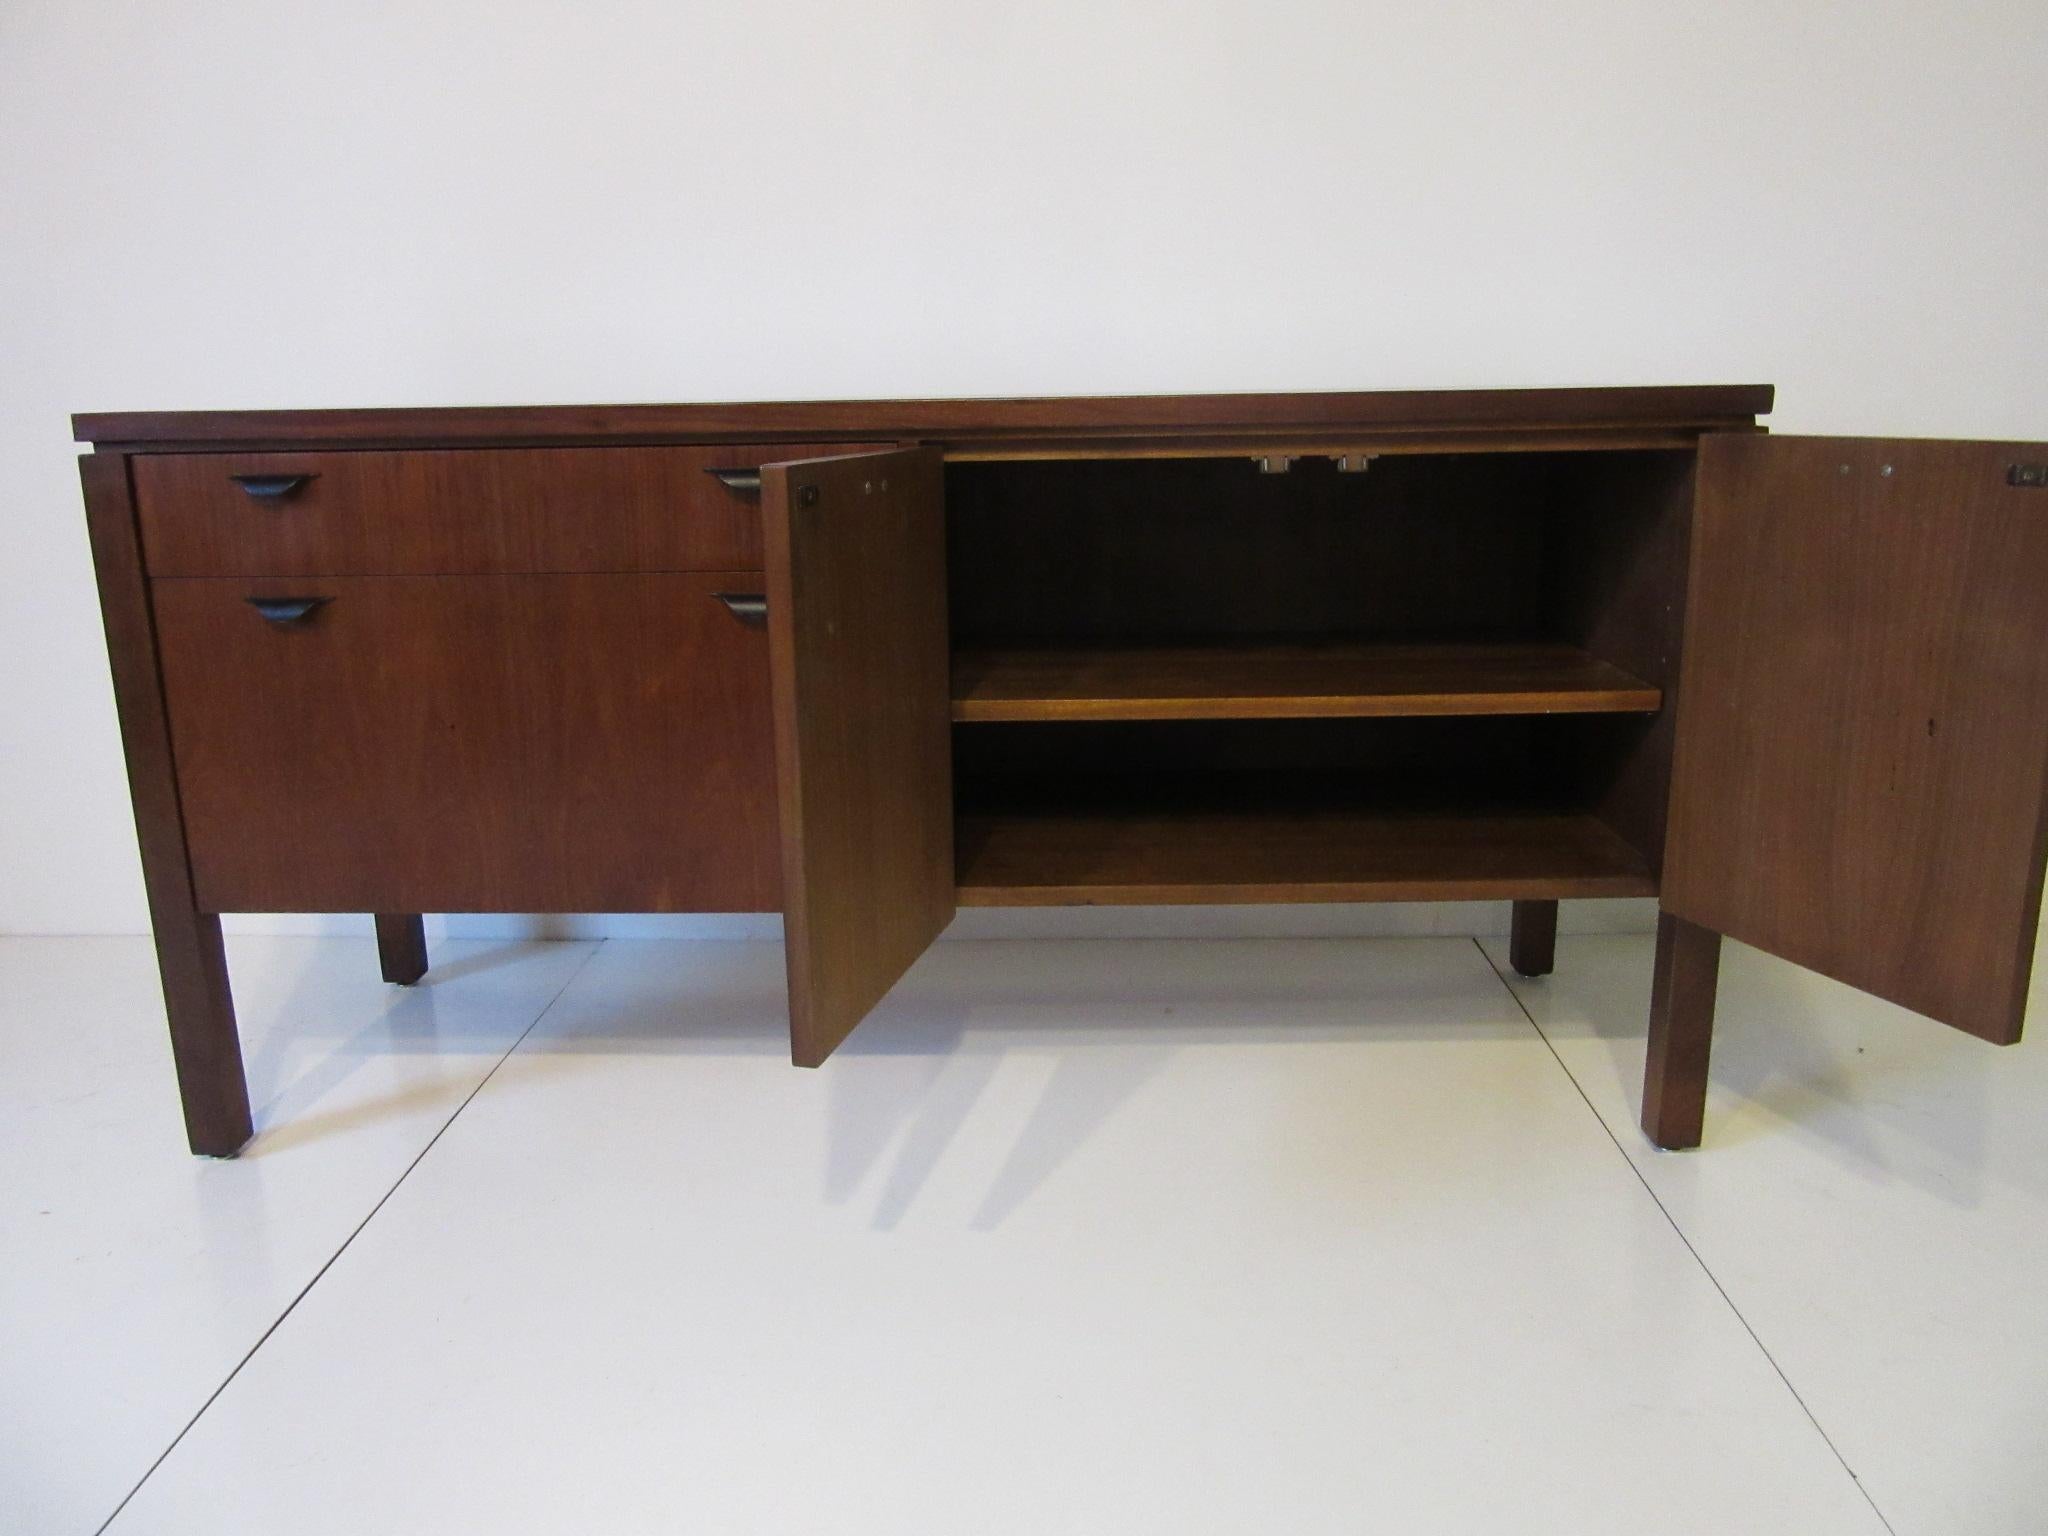 Walnut Credenza or Server in the Style of Jens Risom (amerikanisch)